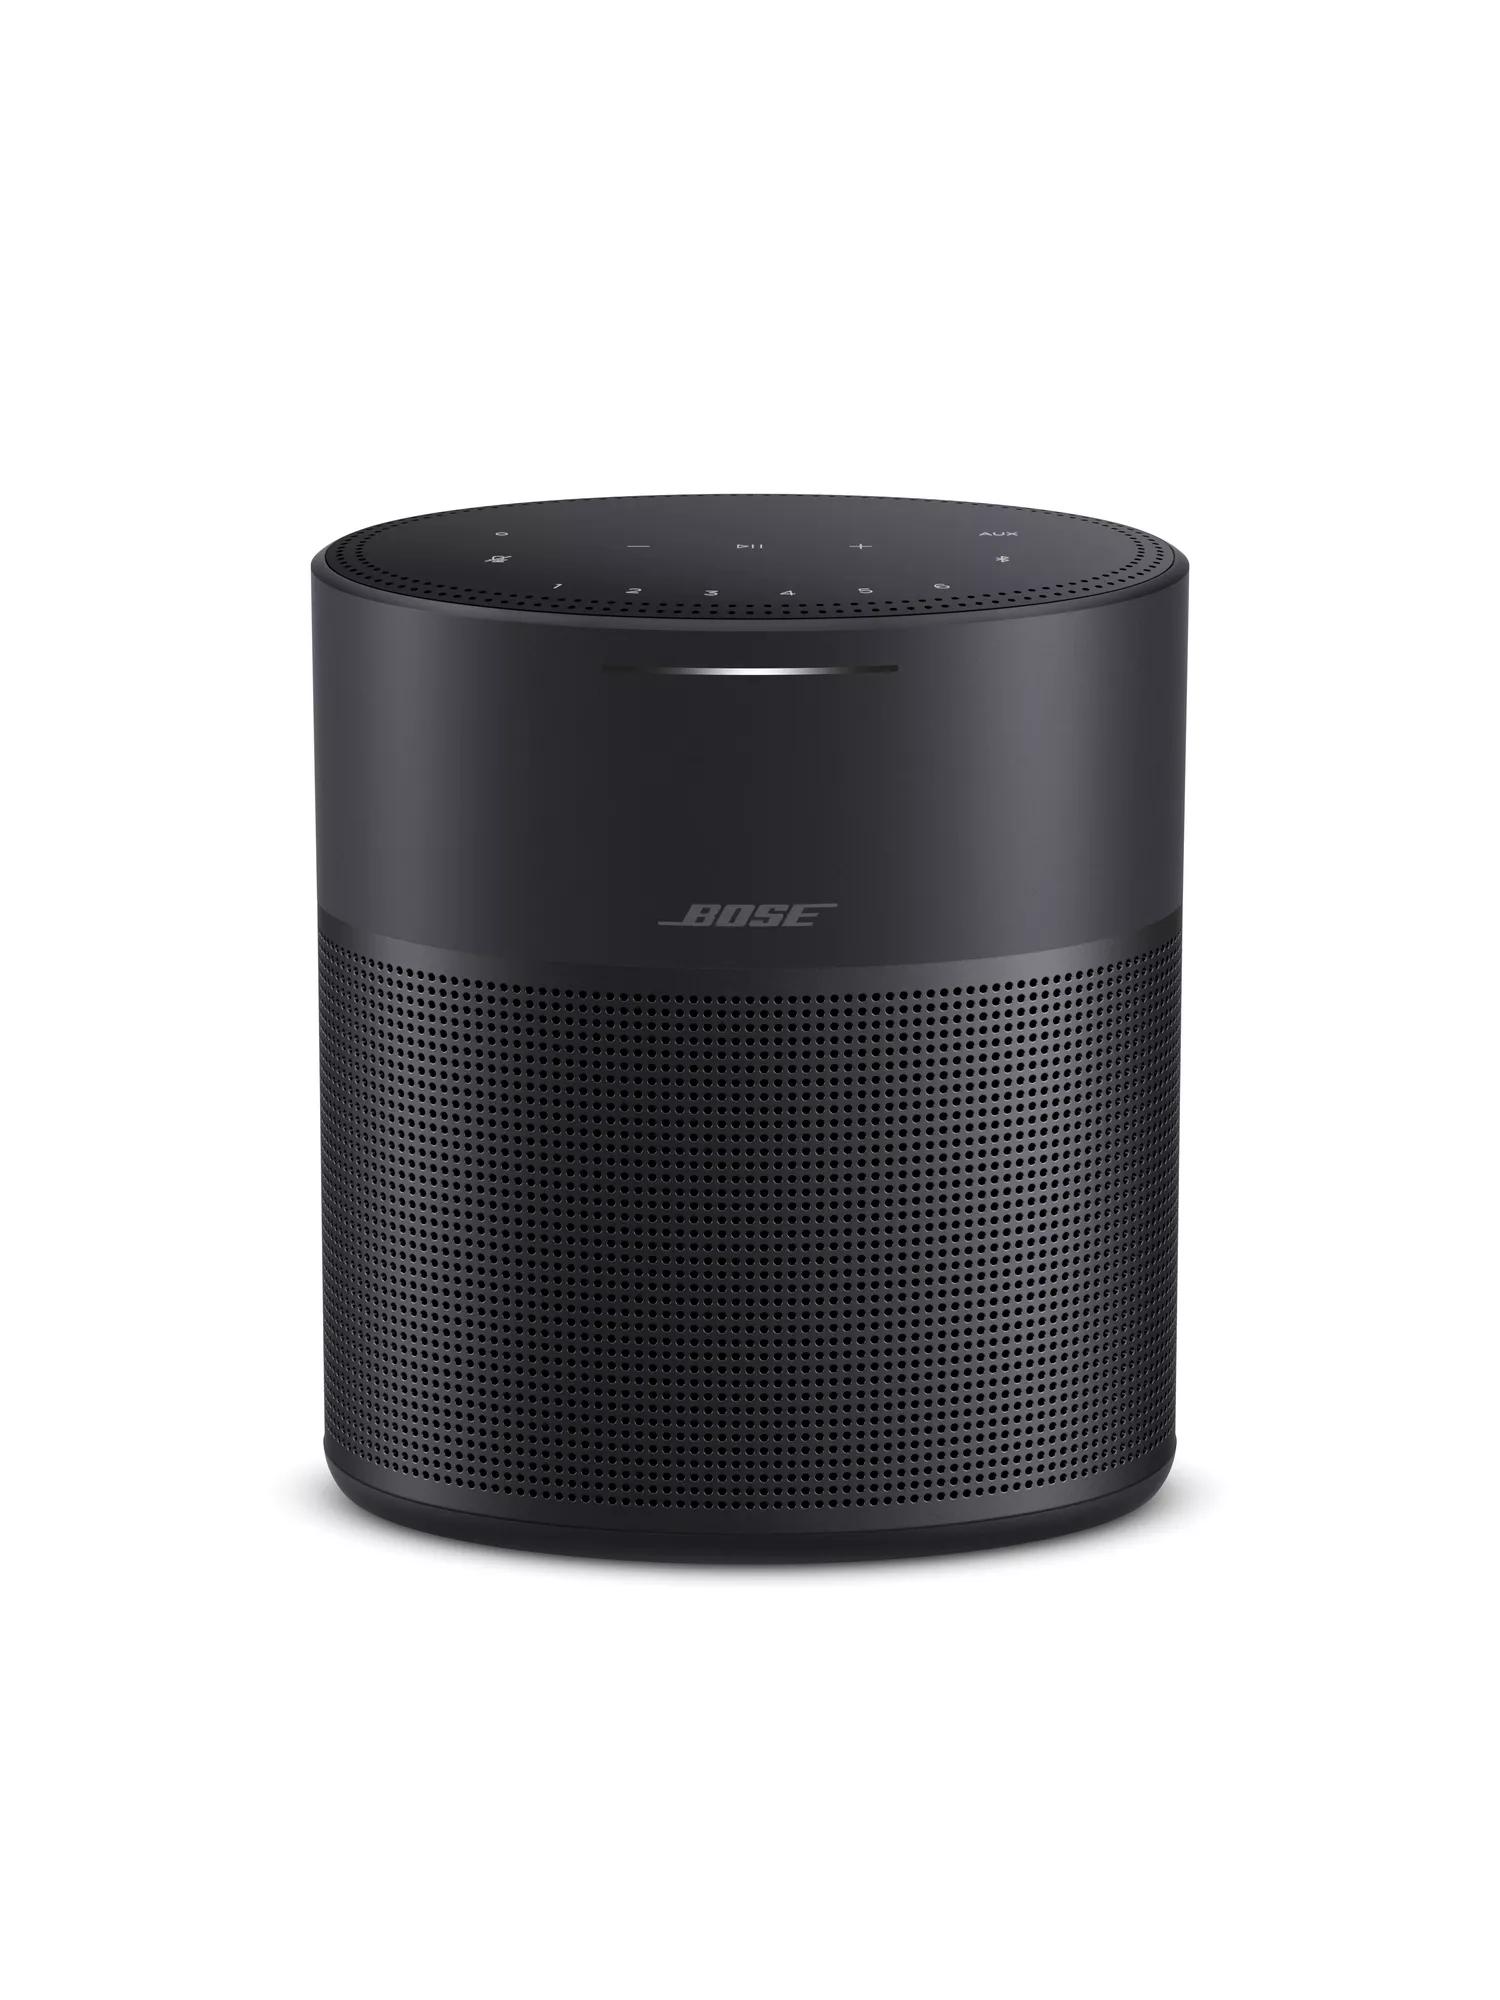 Product Support for Bose Speakers / Smart Home Speakers